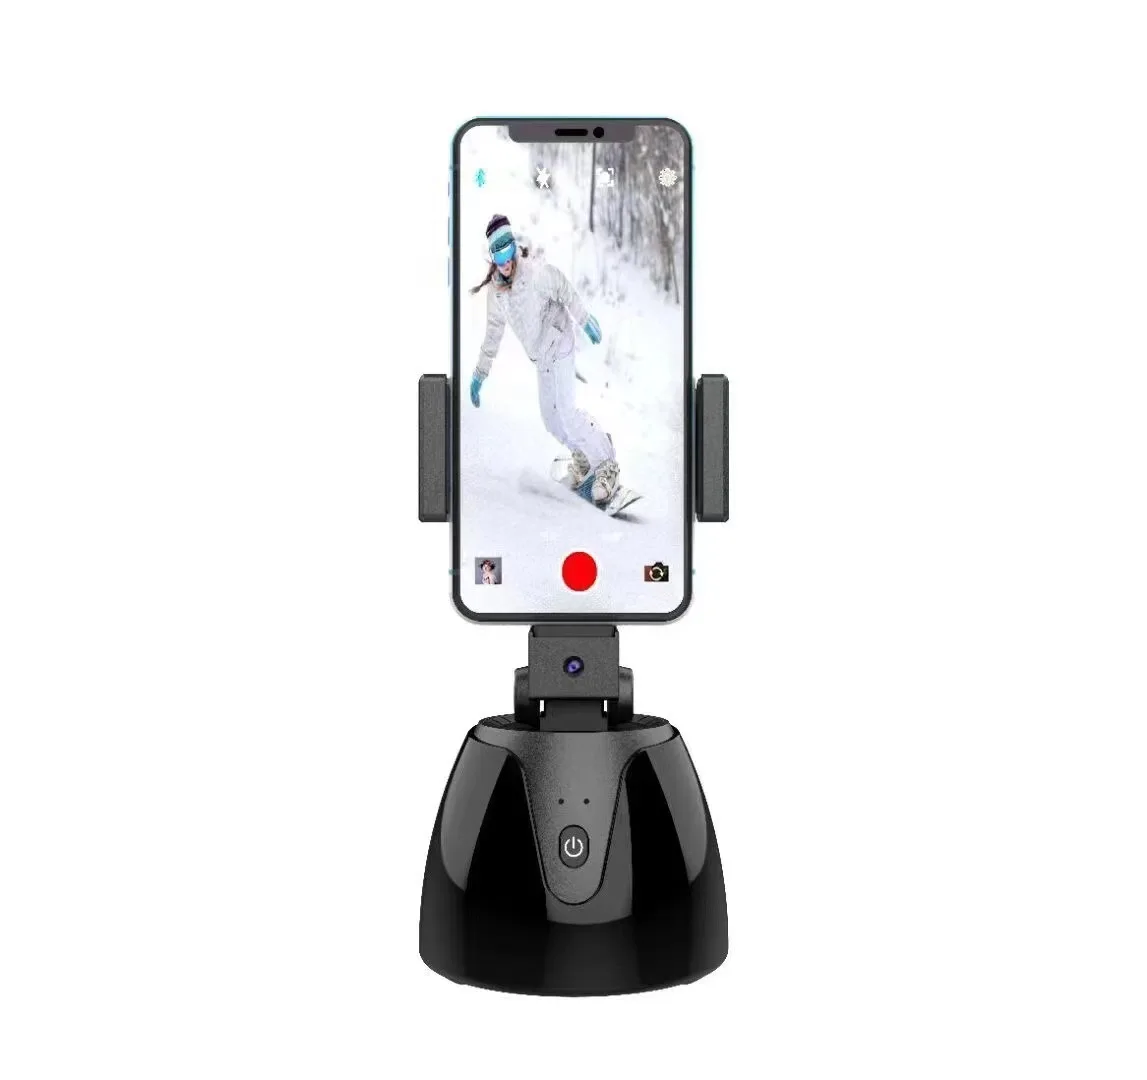 

360 Rotation Auto Face Tracking Phone Holder Live Broadcast Streaming Smart Shooting Selfie Camera Mobile phone Mount holder, Black/white